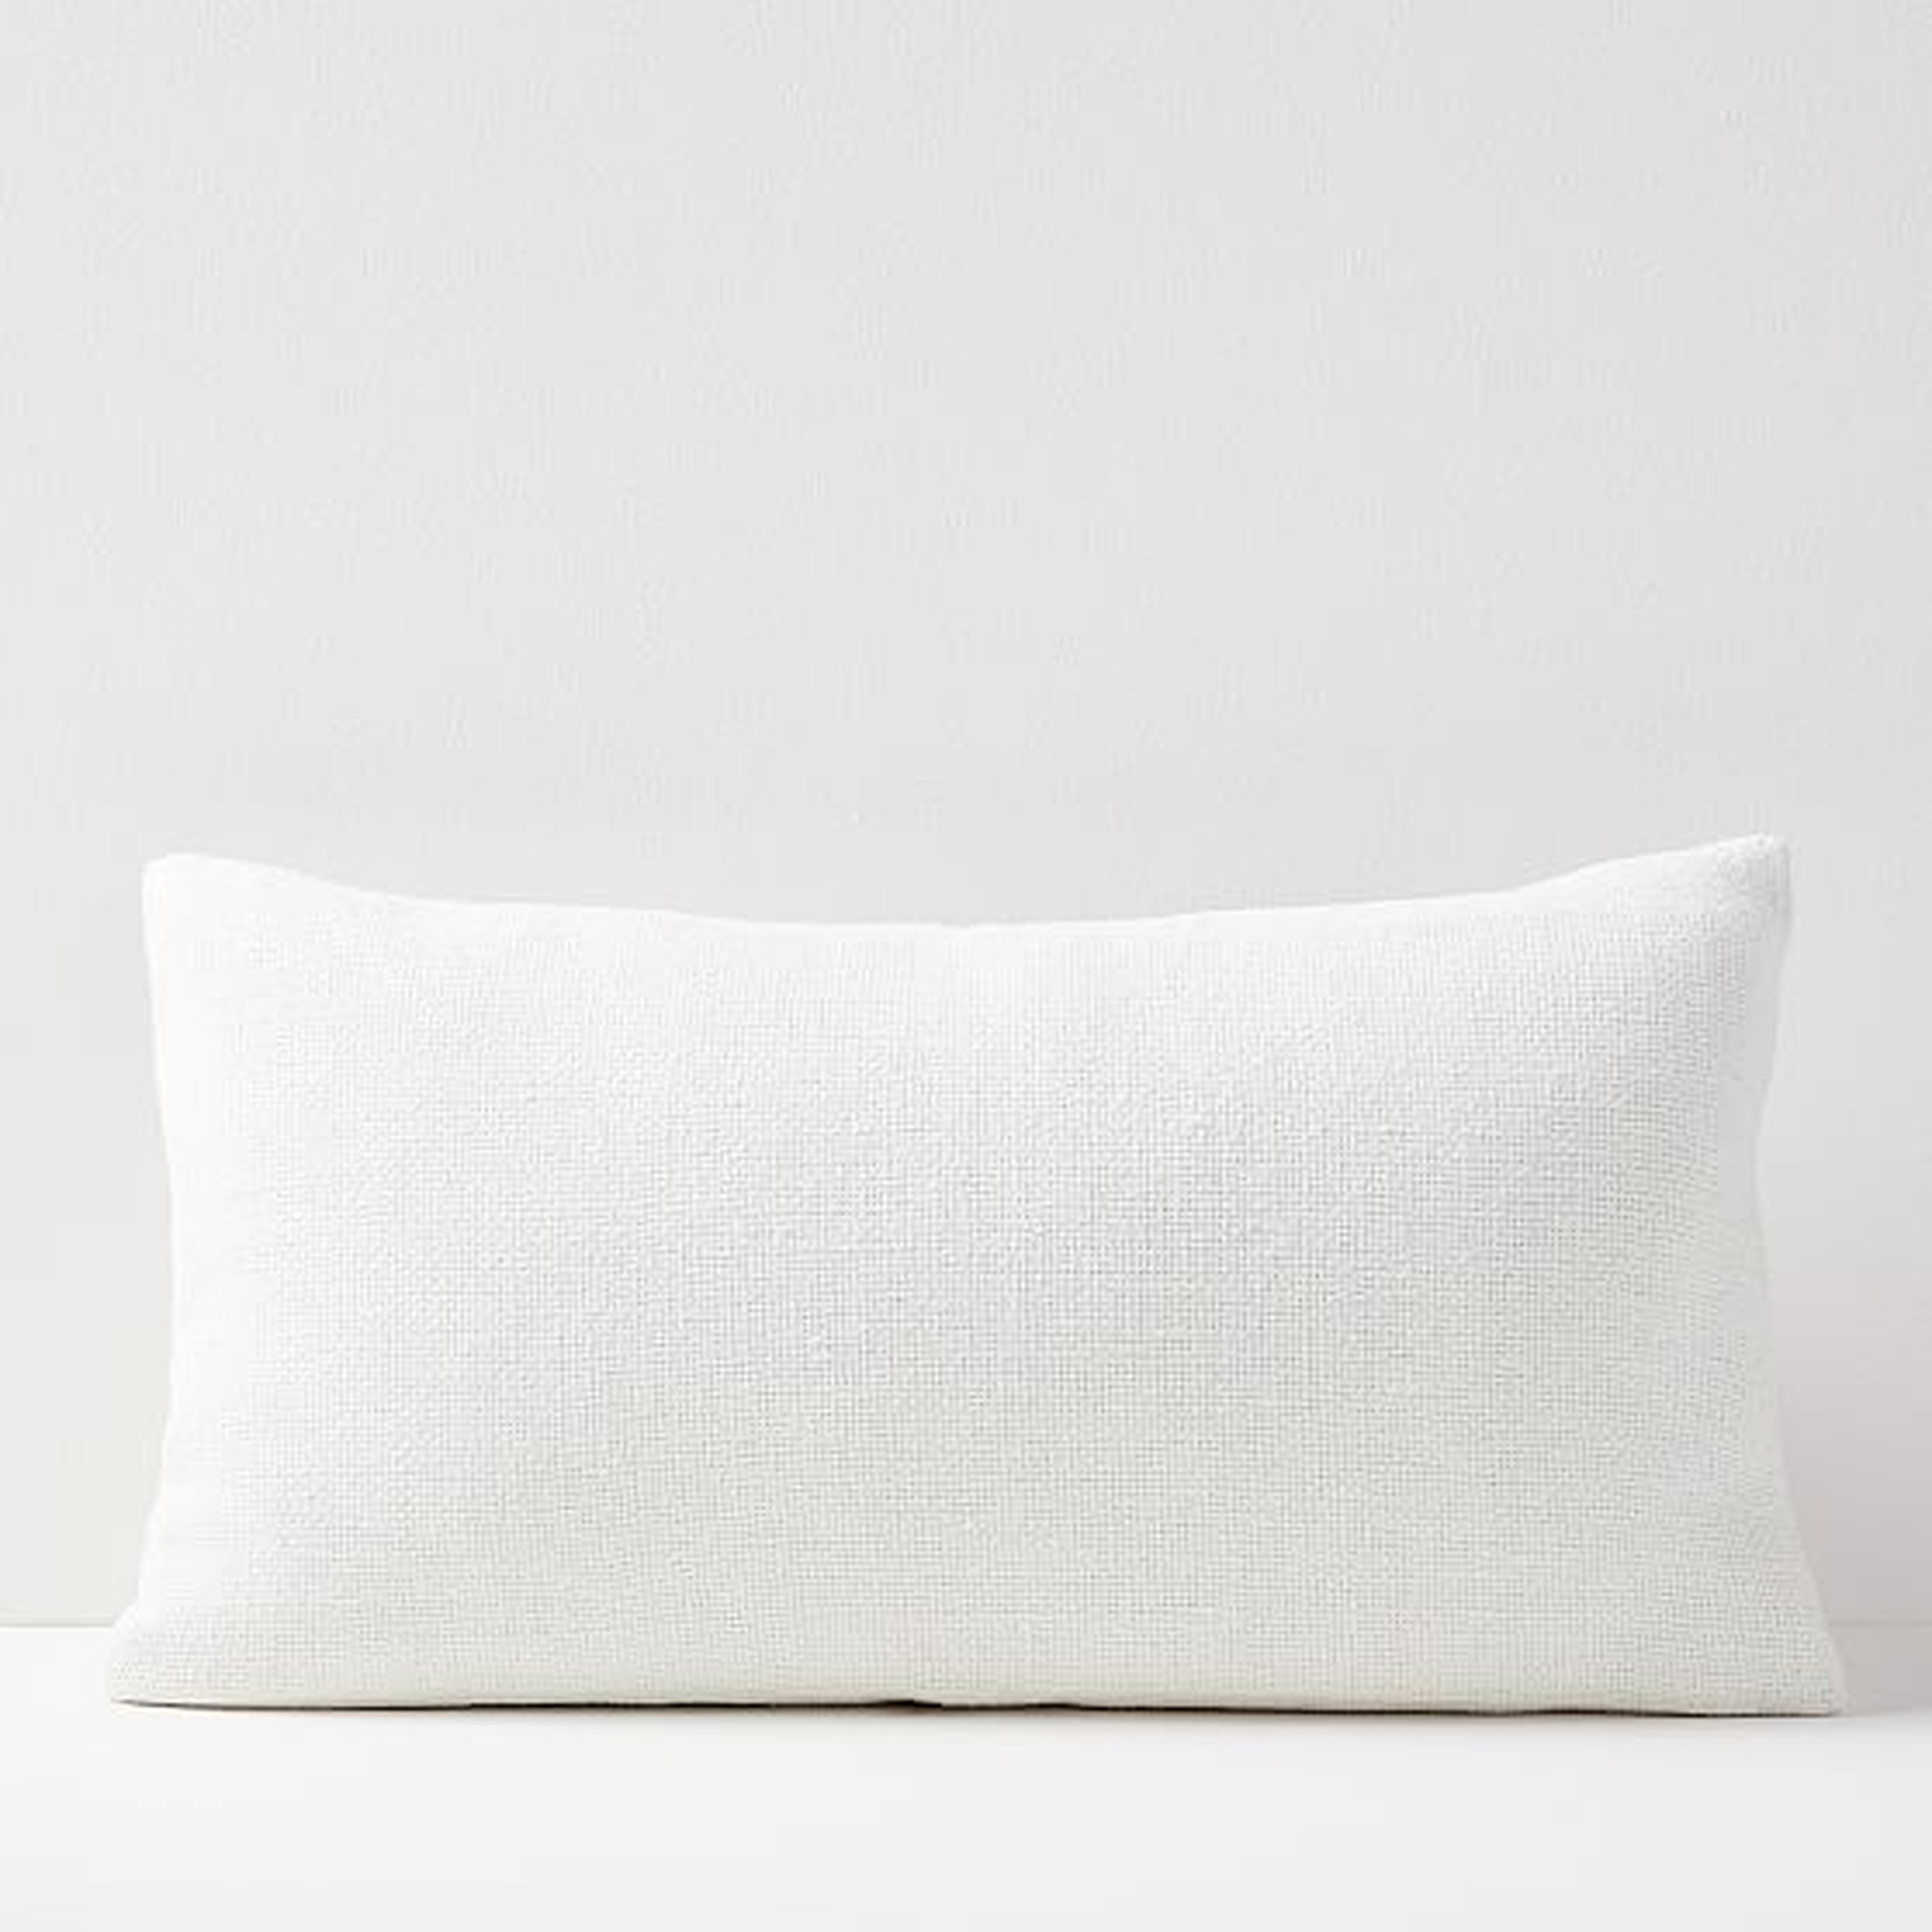 Silk Handloomed Pillow Cover with Down Insert, Stone White, 12"x21" - West Elm